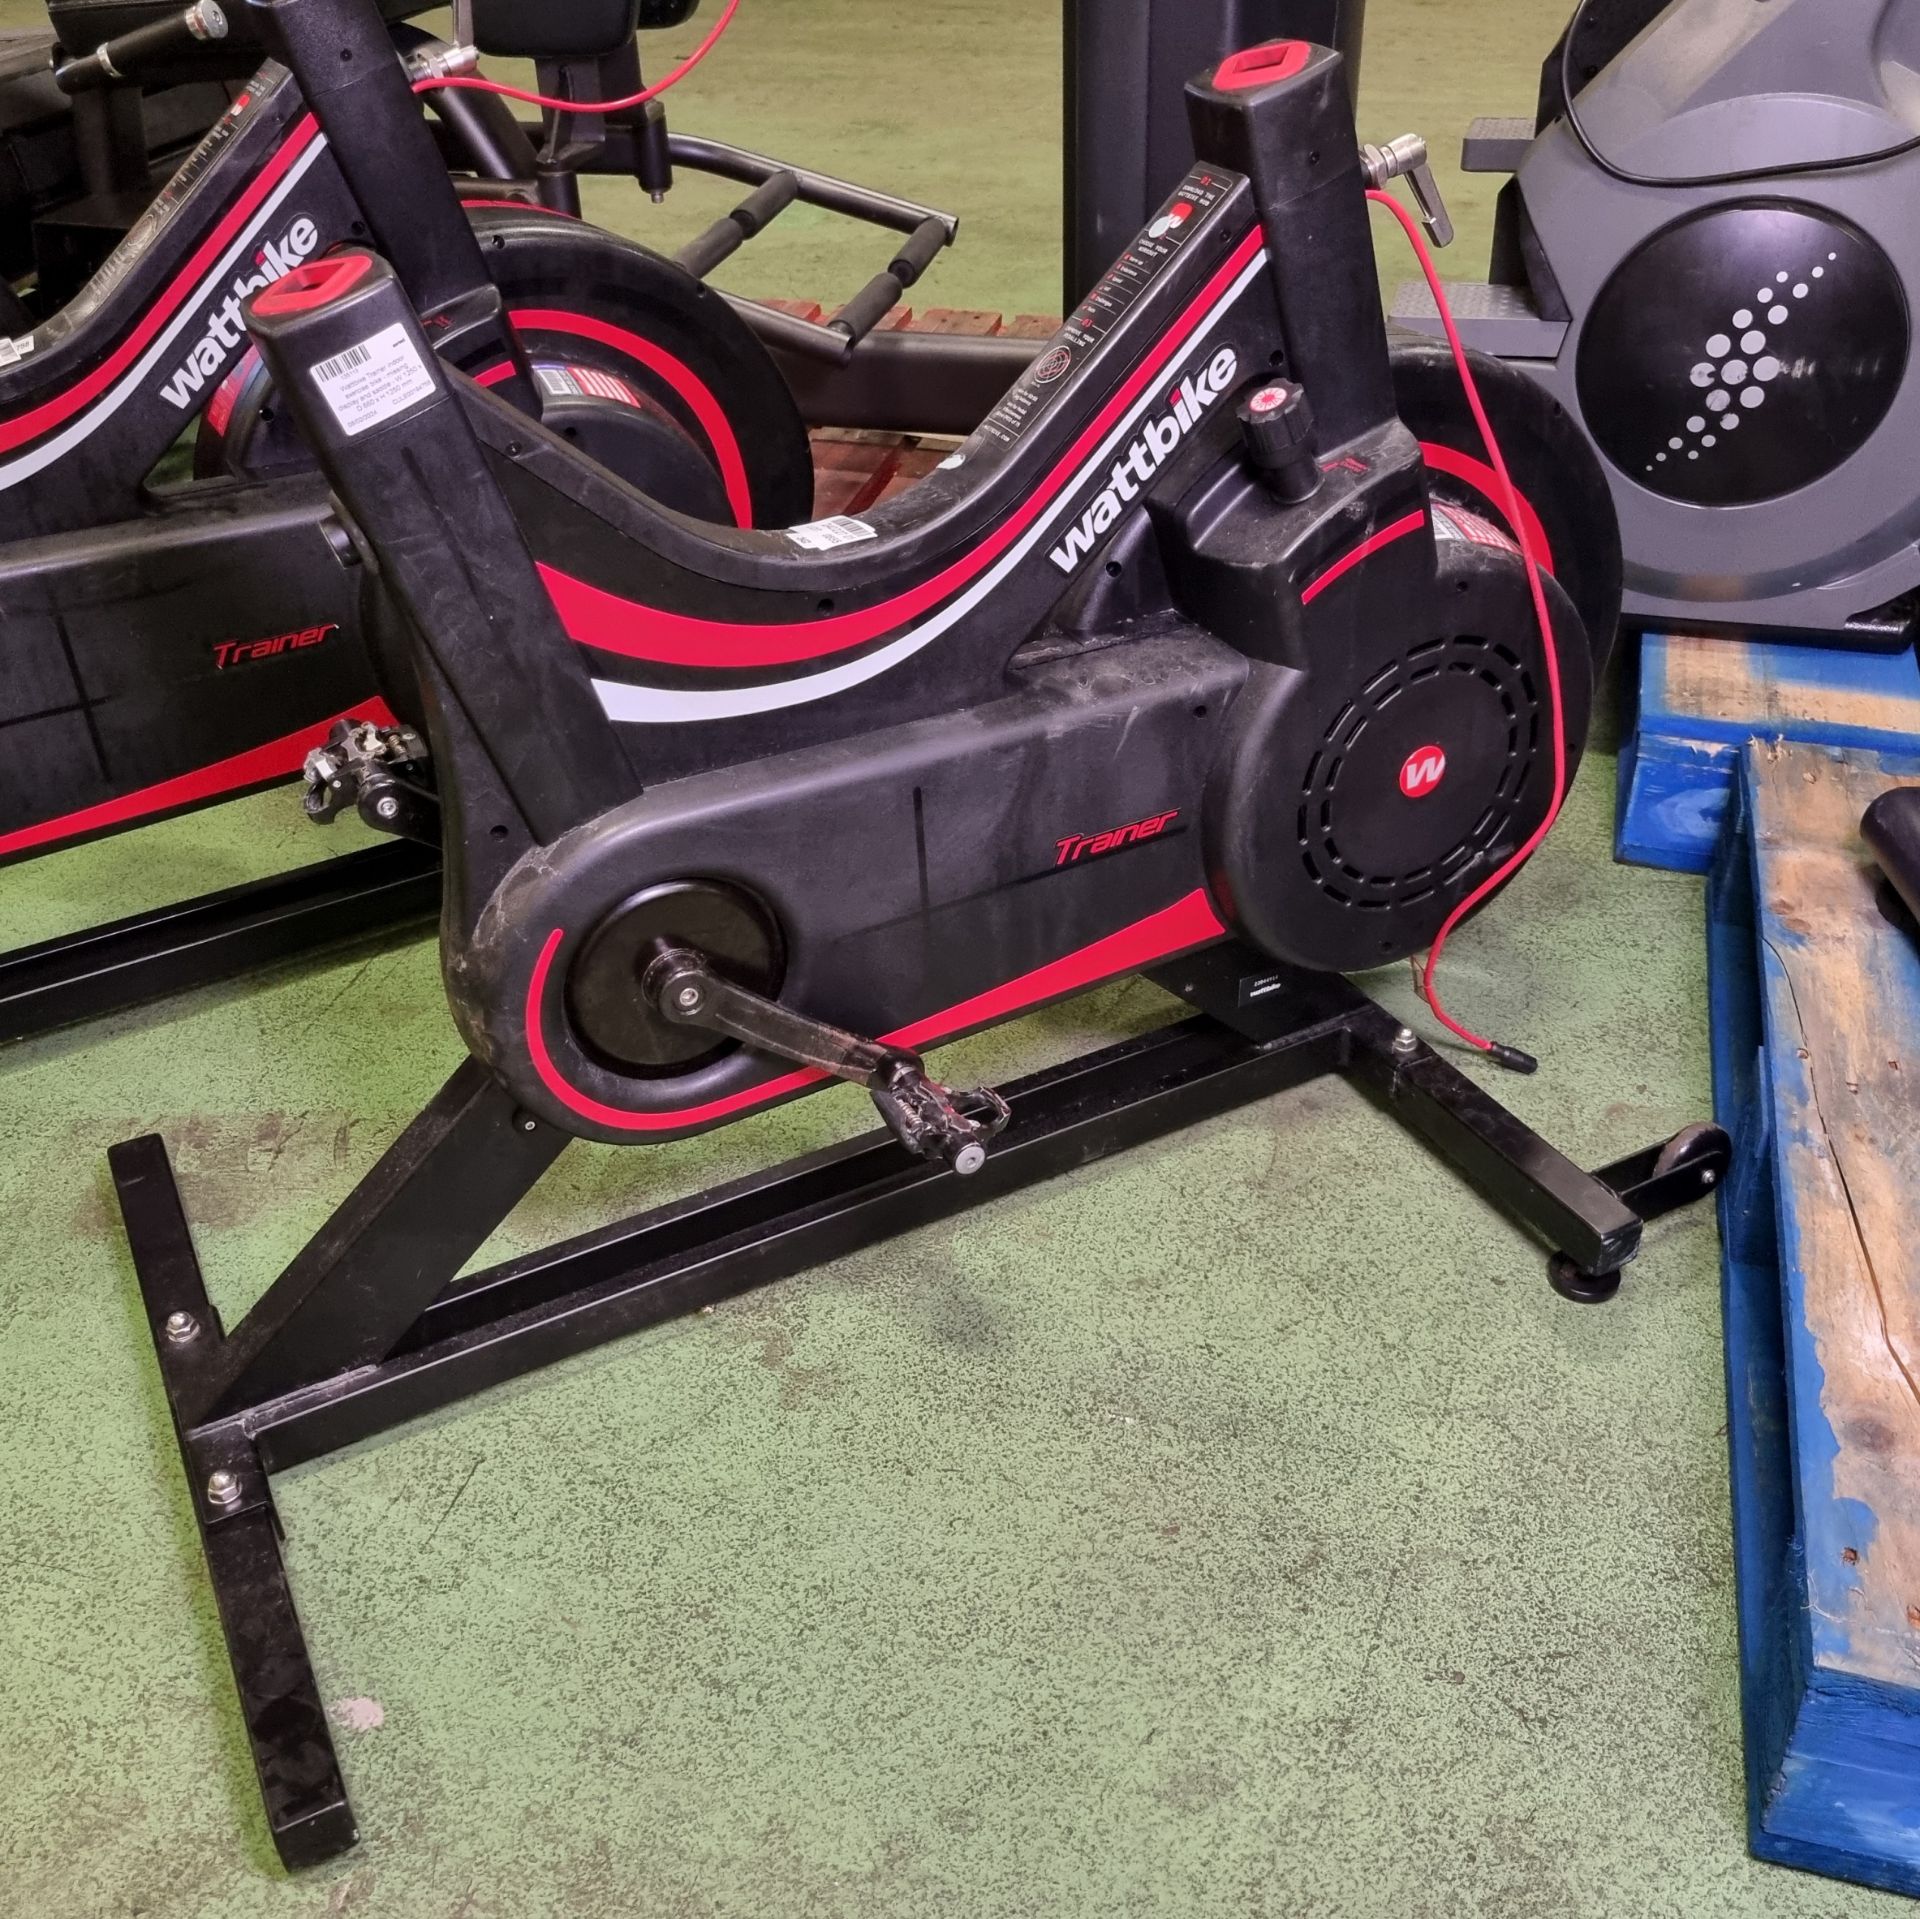 Wattbike Trainer indoor exercise bike - BODY ONLY - missing handle bars, display and saddle - Image 2 of 5